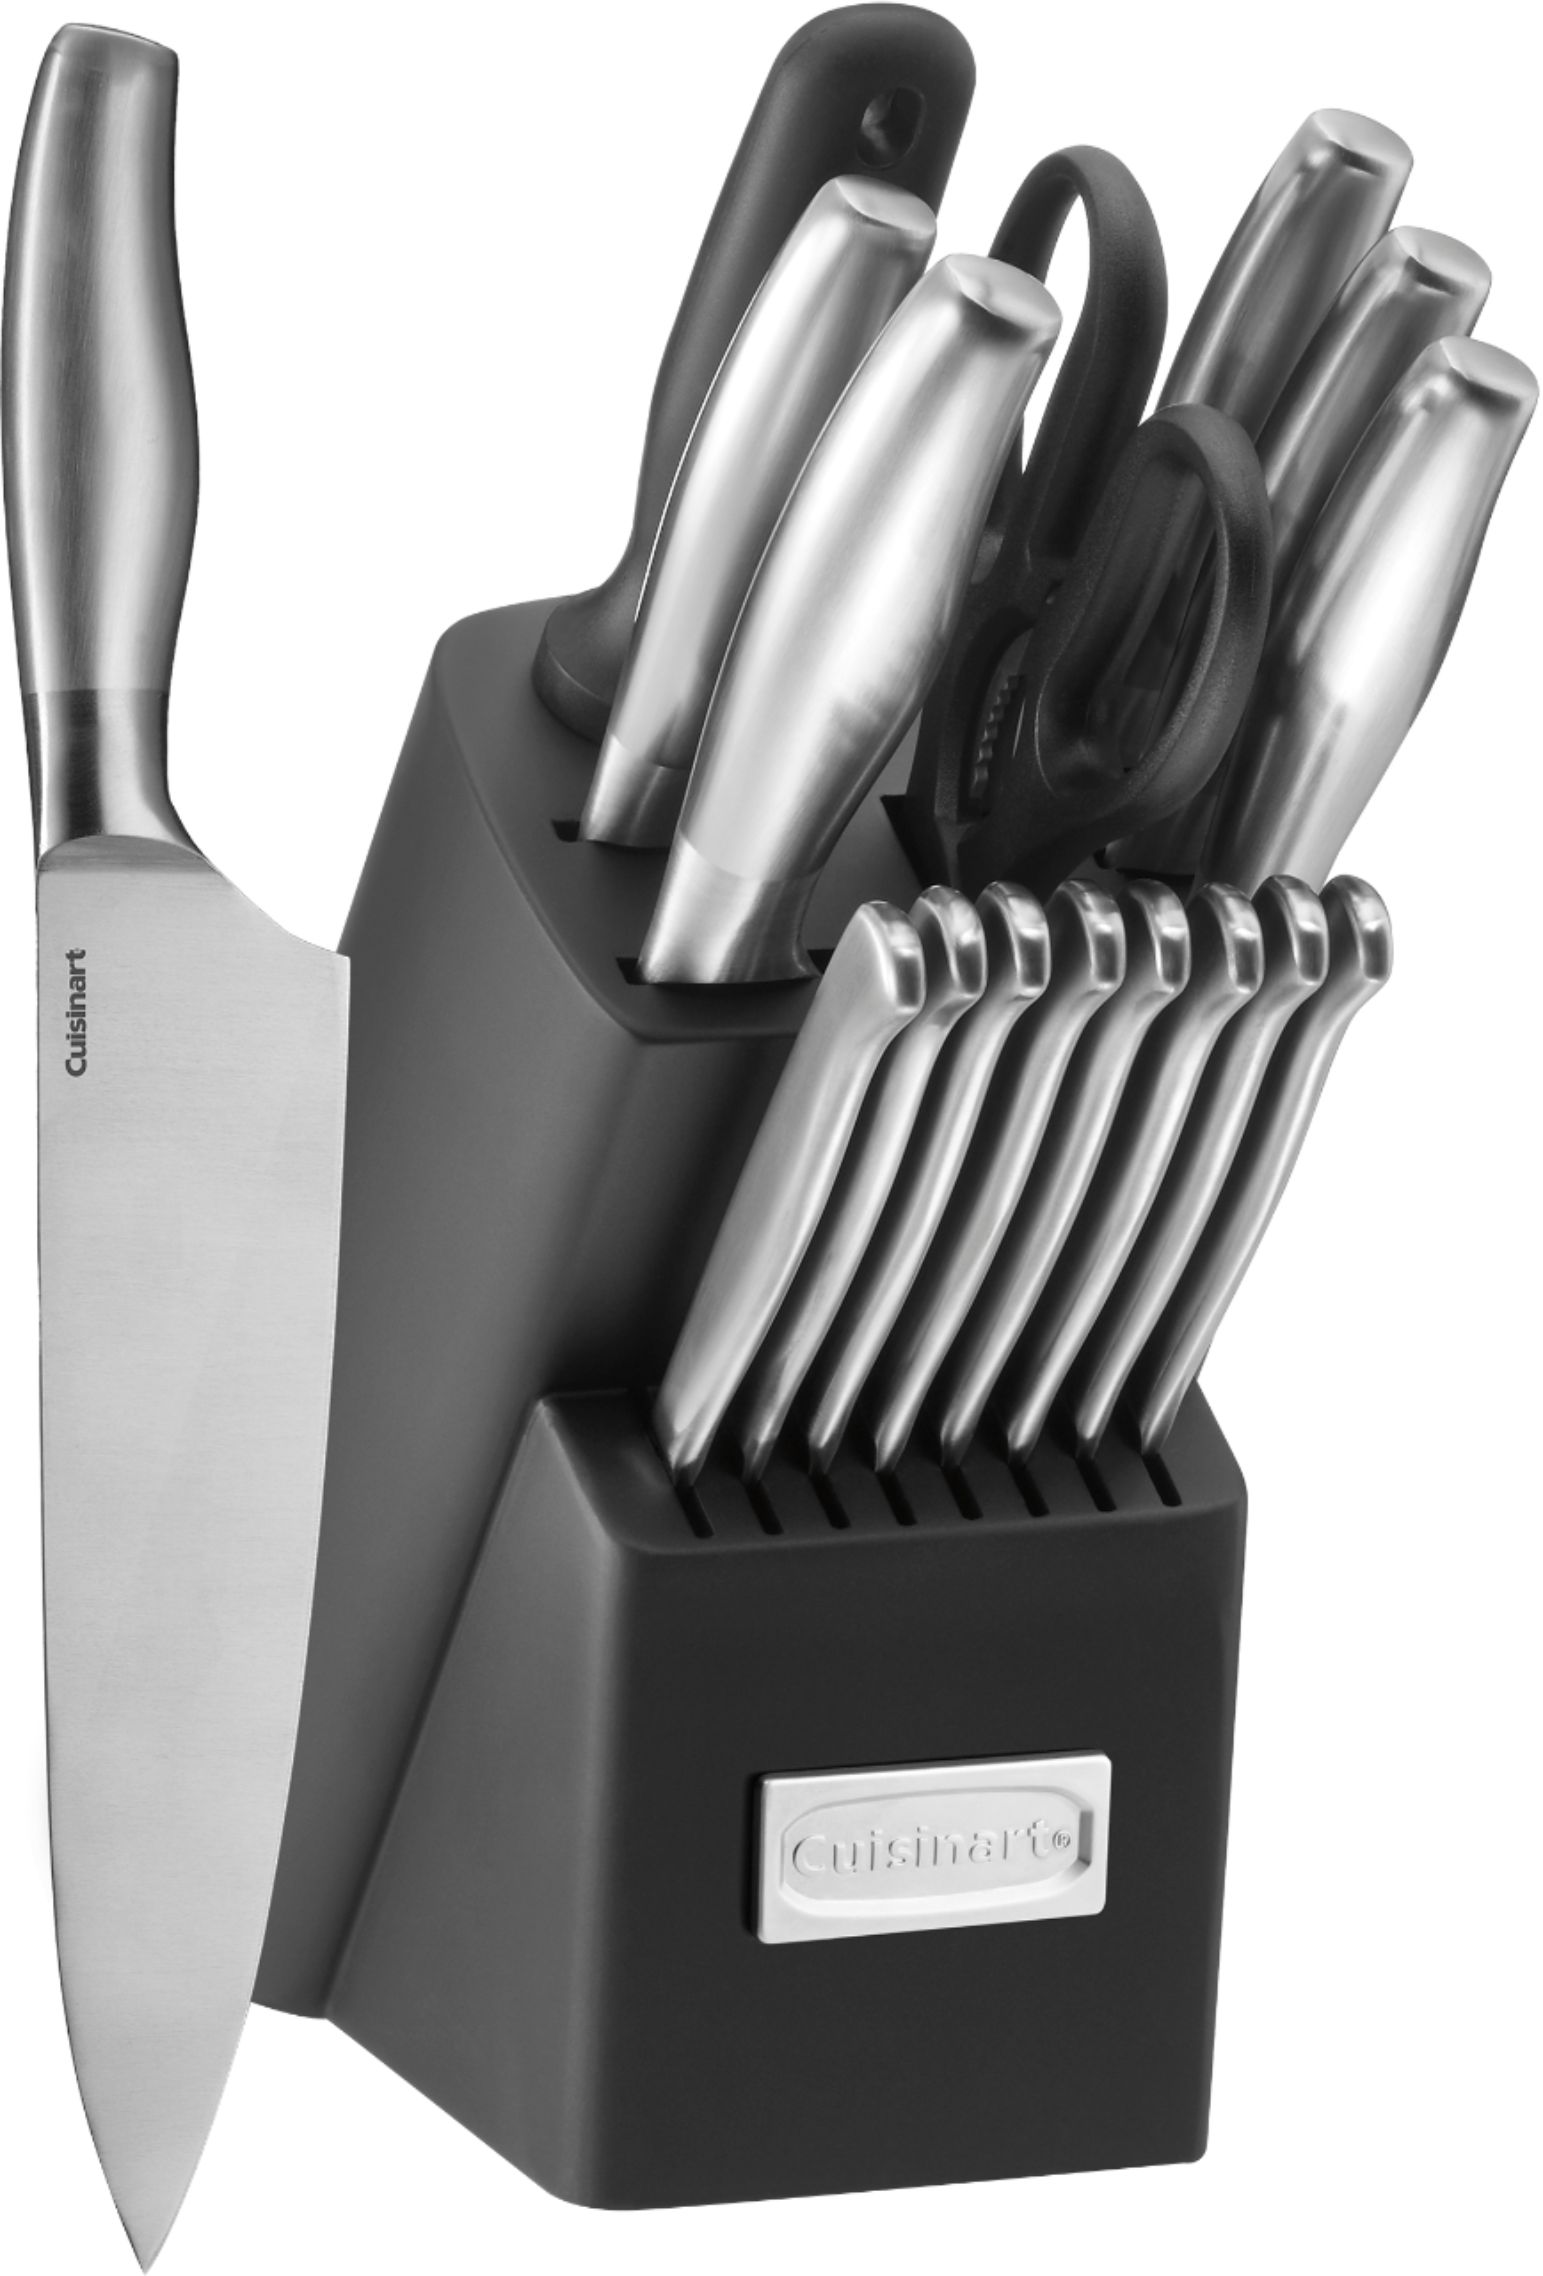 Best Buy: Cuisinart 17pc Cooking and Baking Gadget Set Stainless Steel  CTG-00-17CB